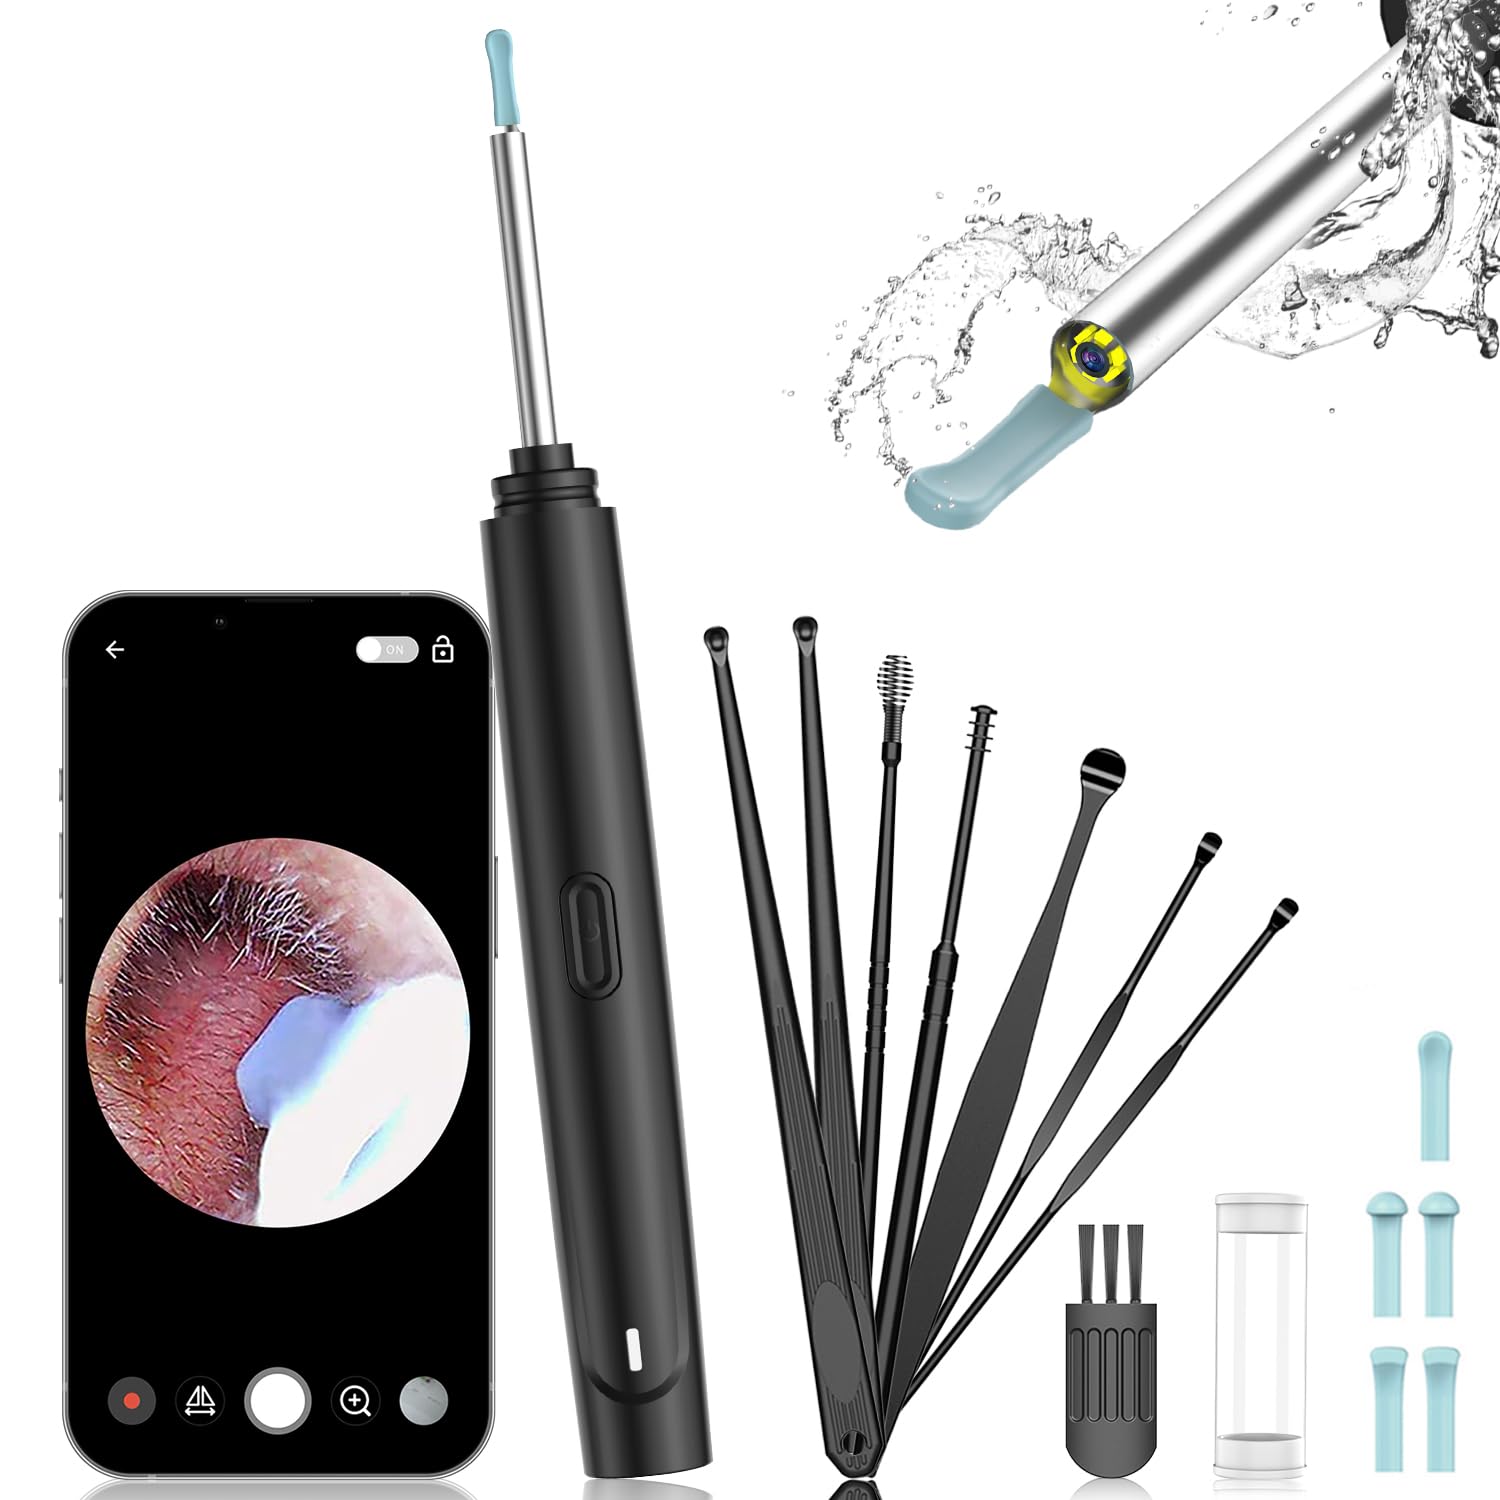  Ear Wax Removal, Ear Cleaner with Camera, Ear Remover with  1080P Camera, Otoscope with Light, Earwax Remover Tools for iPhone, iPad,  Android Smart Phones : Health & Household